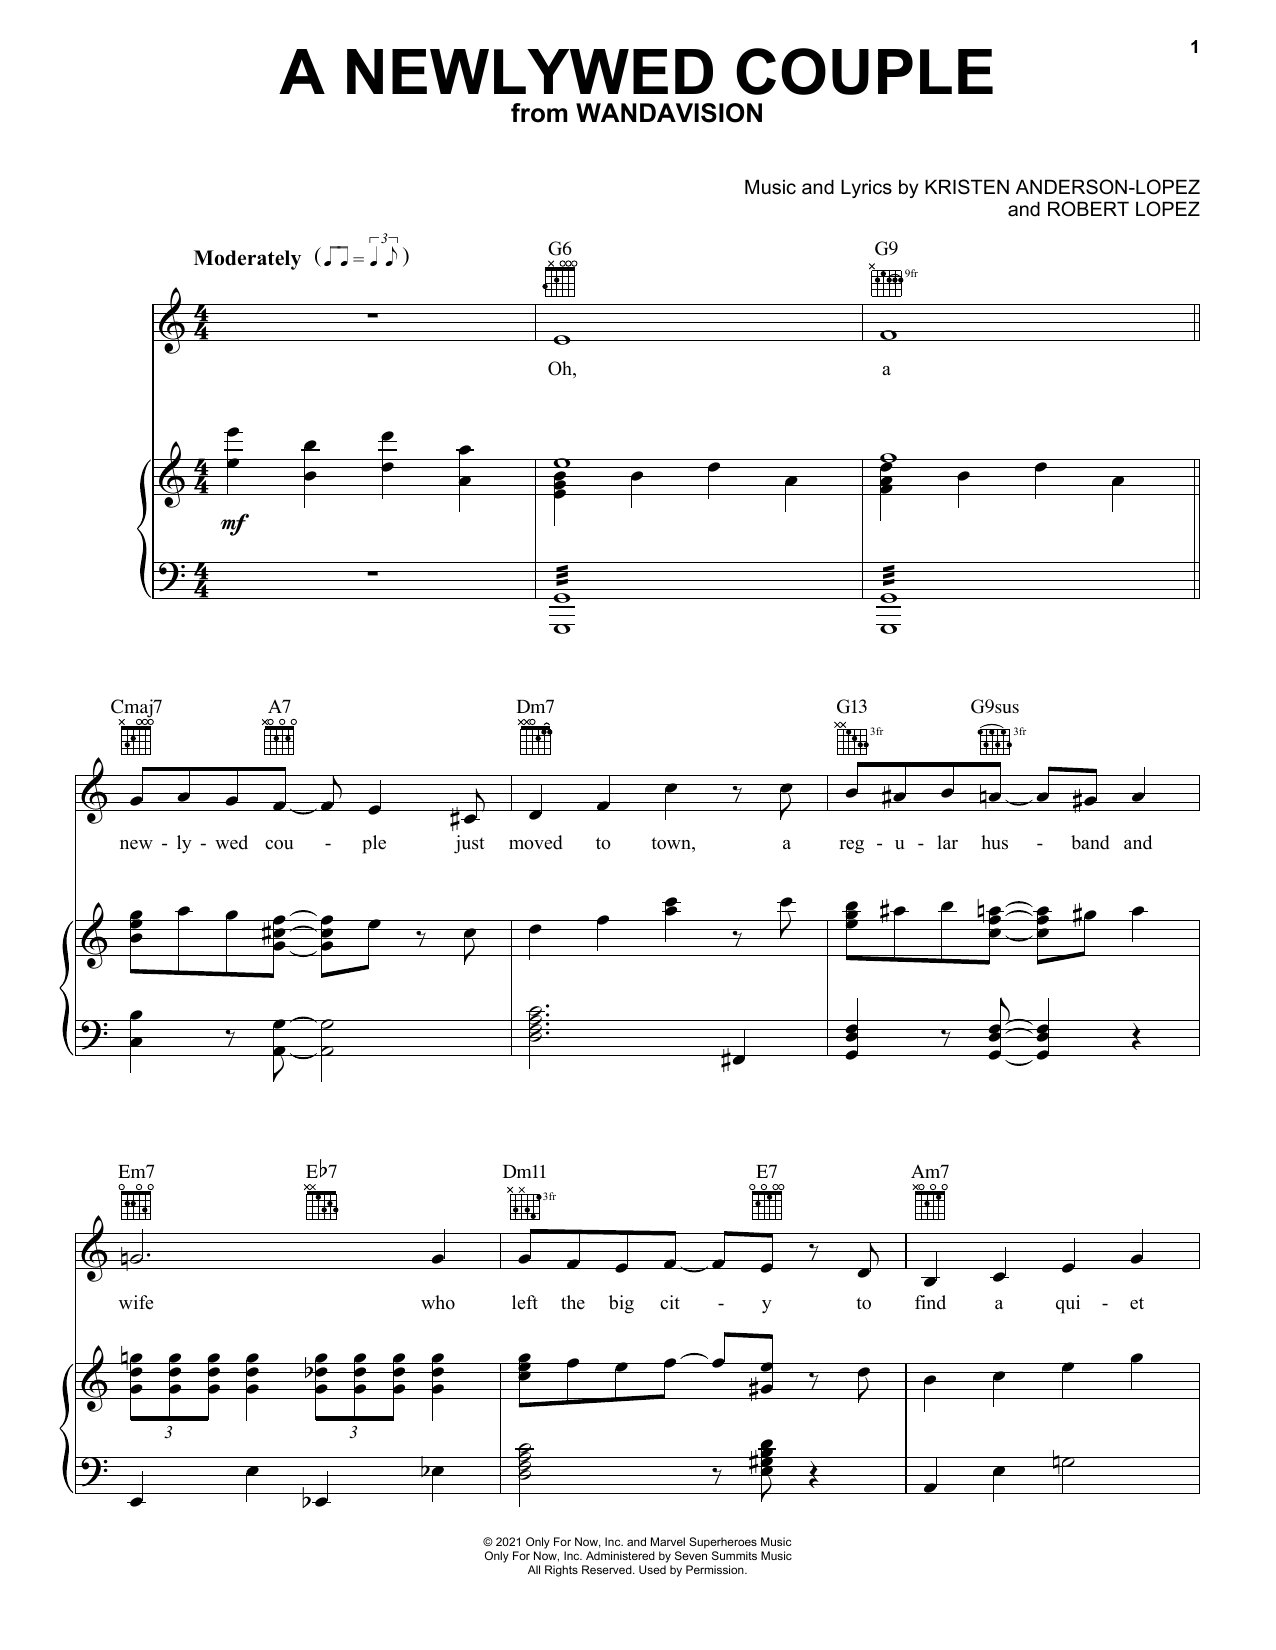 Download Kristen Anderson-Lopez & Robert Lope A Newlywed Couple (from WandaVision) Sheet Music